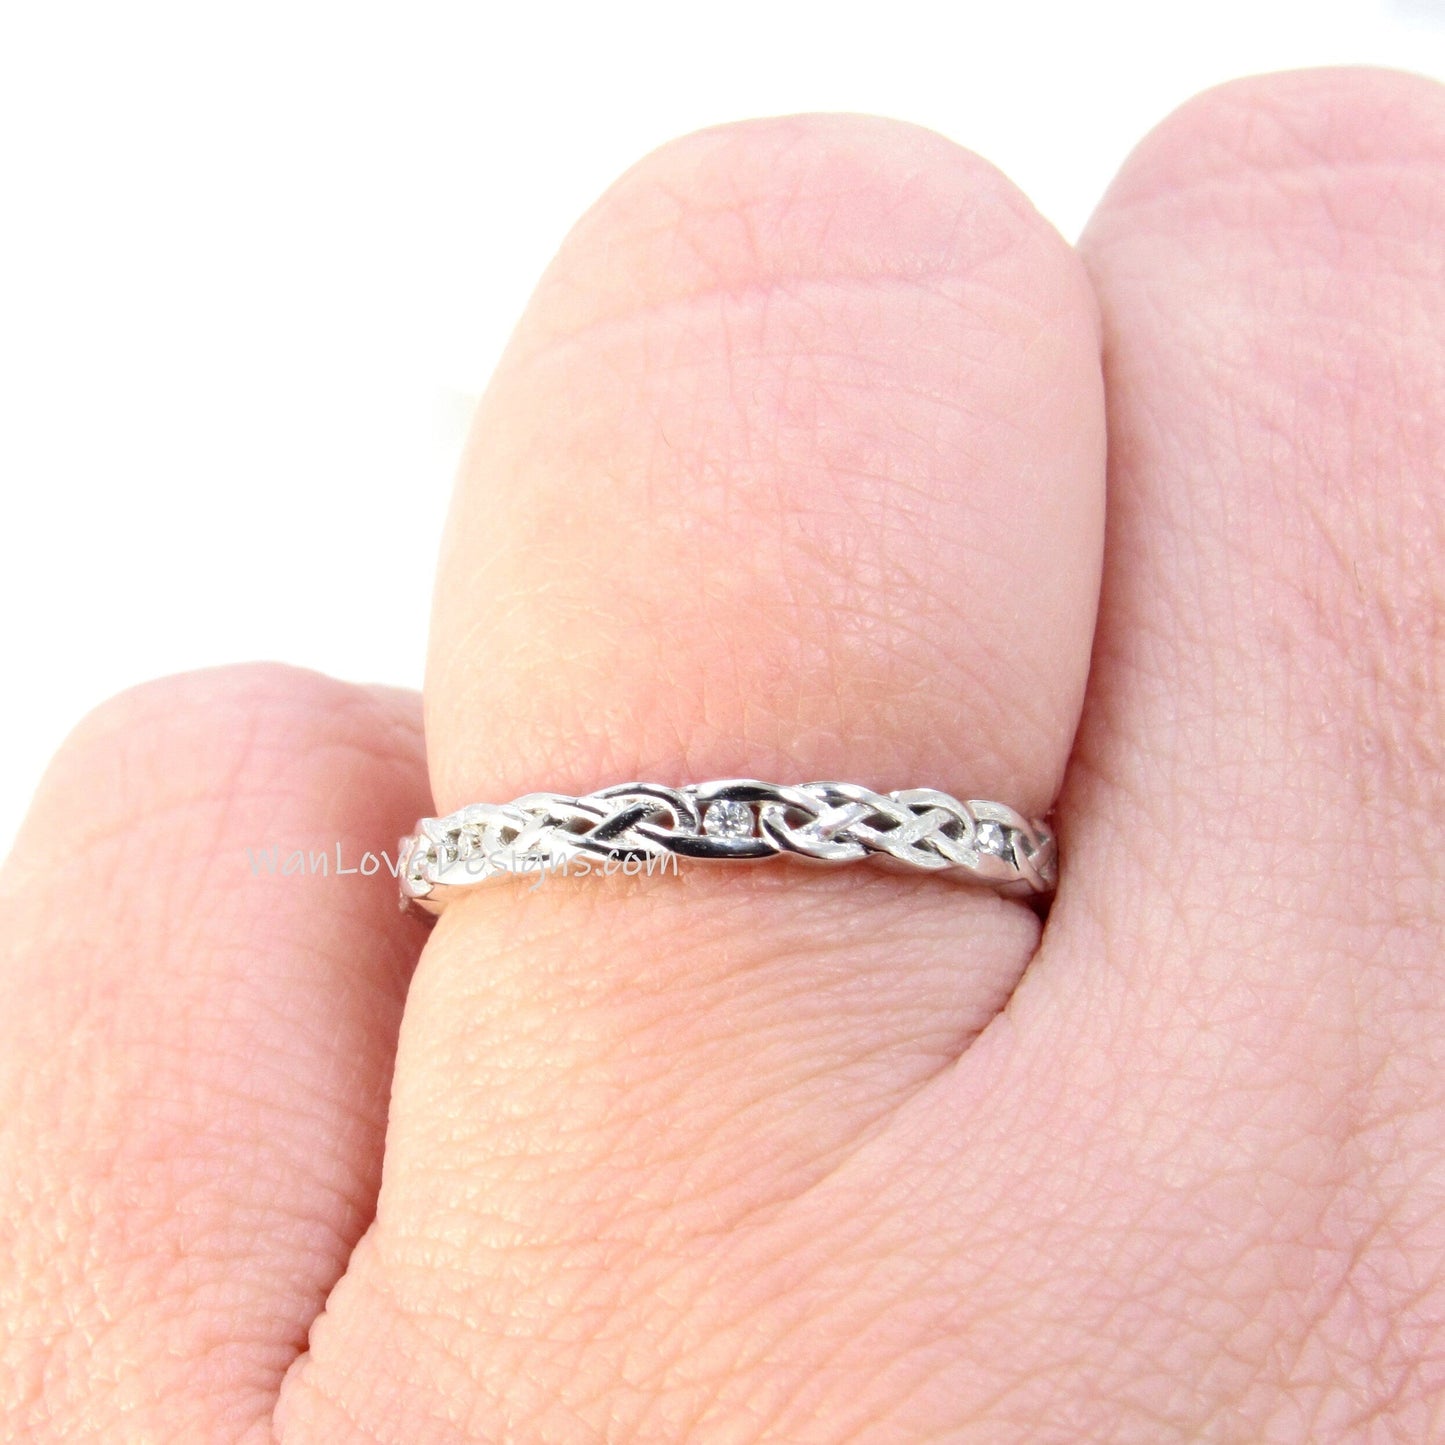 Moissanite Celtic Knot Braided Infinity Twist Split Shank womans Wedding Band Ring Rose or White Gold Custom Anniversary Gift Ready to Ship Wan Love Designs